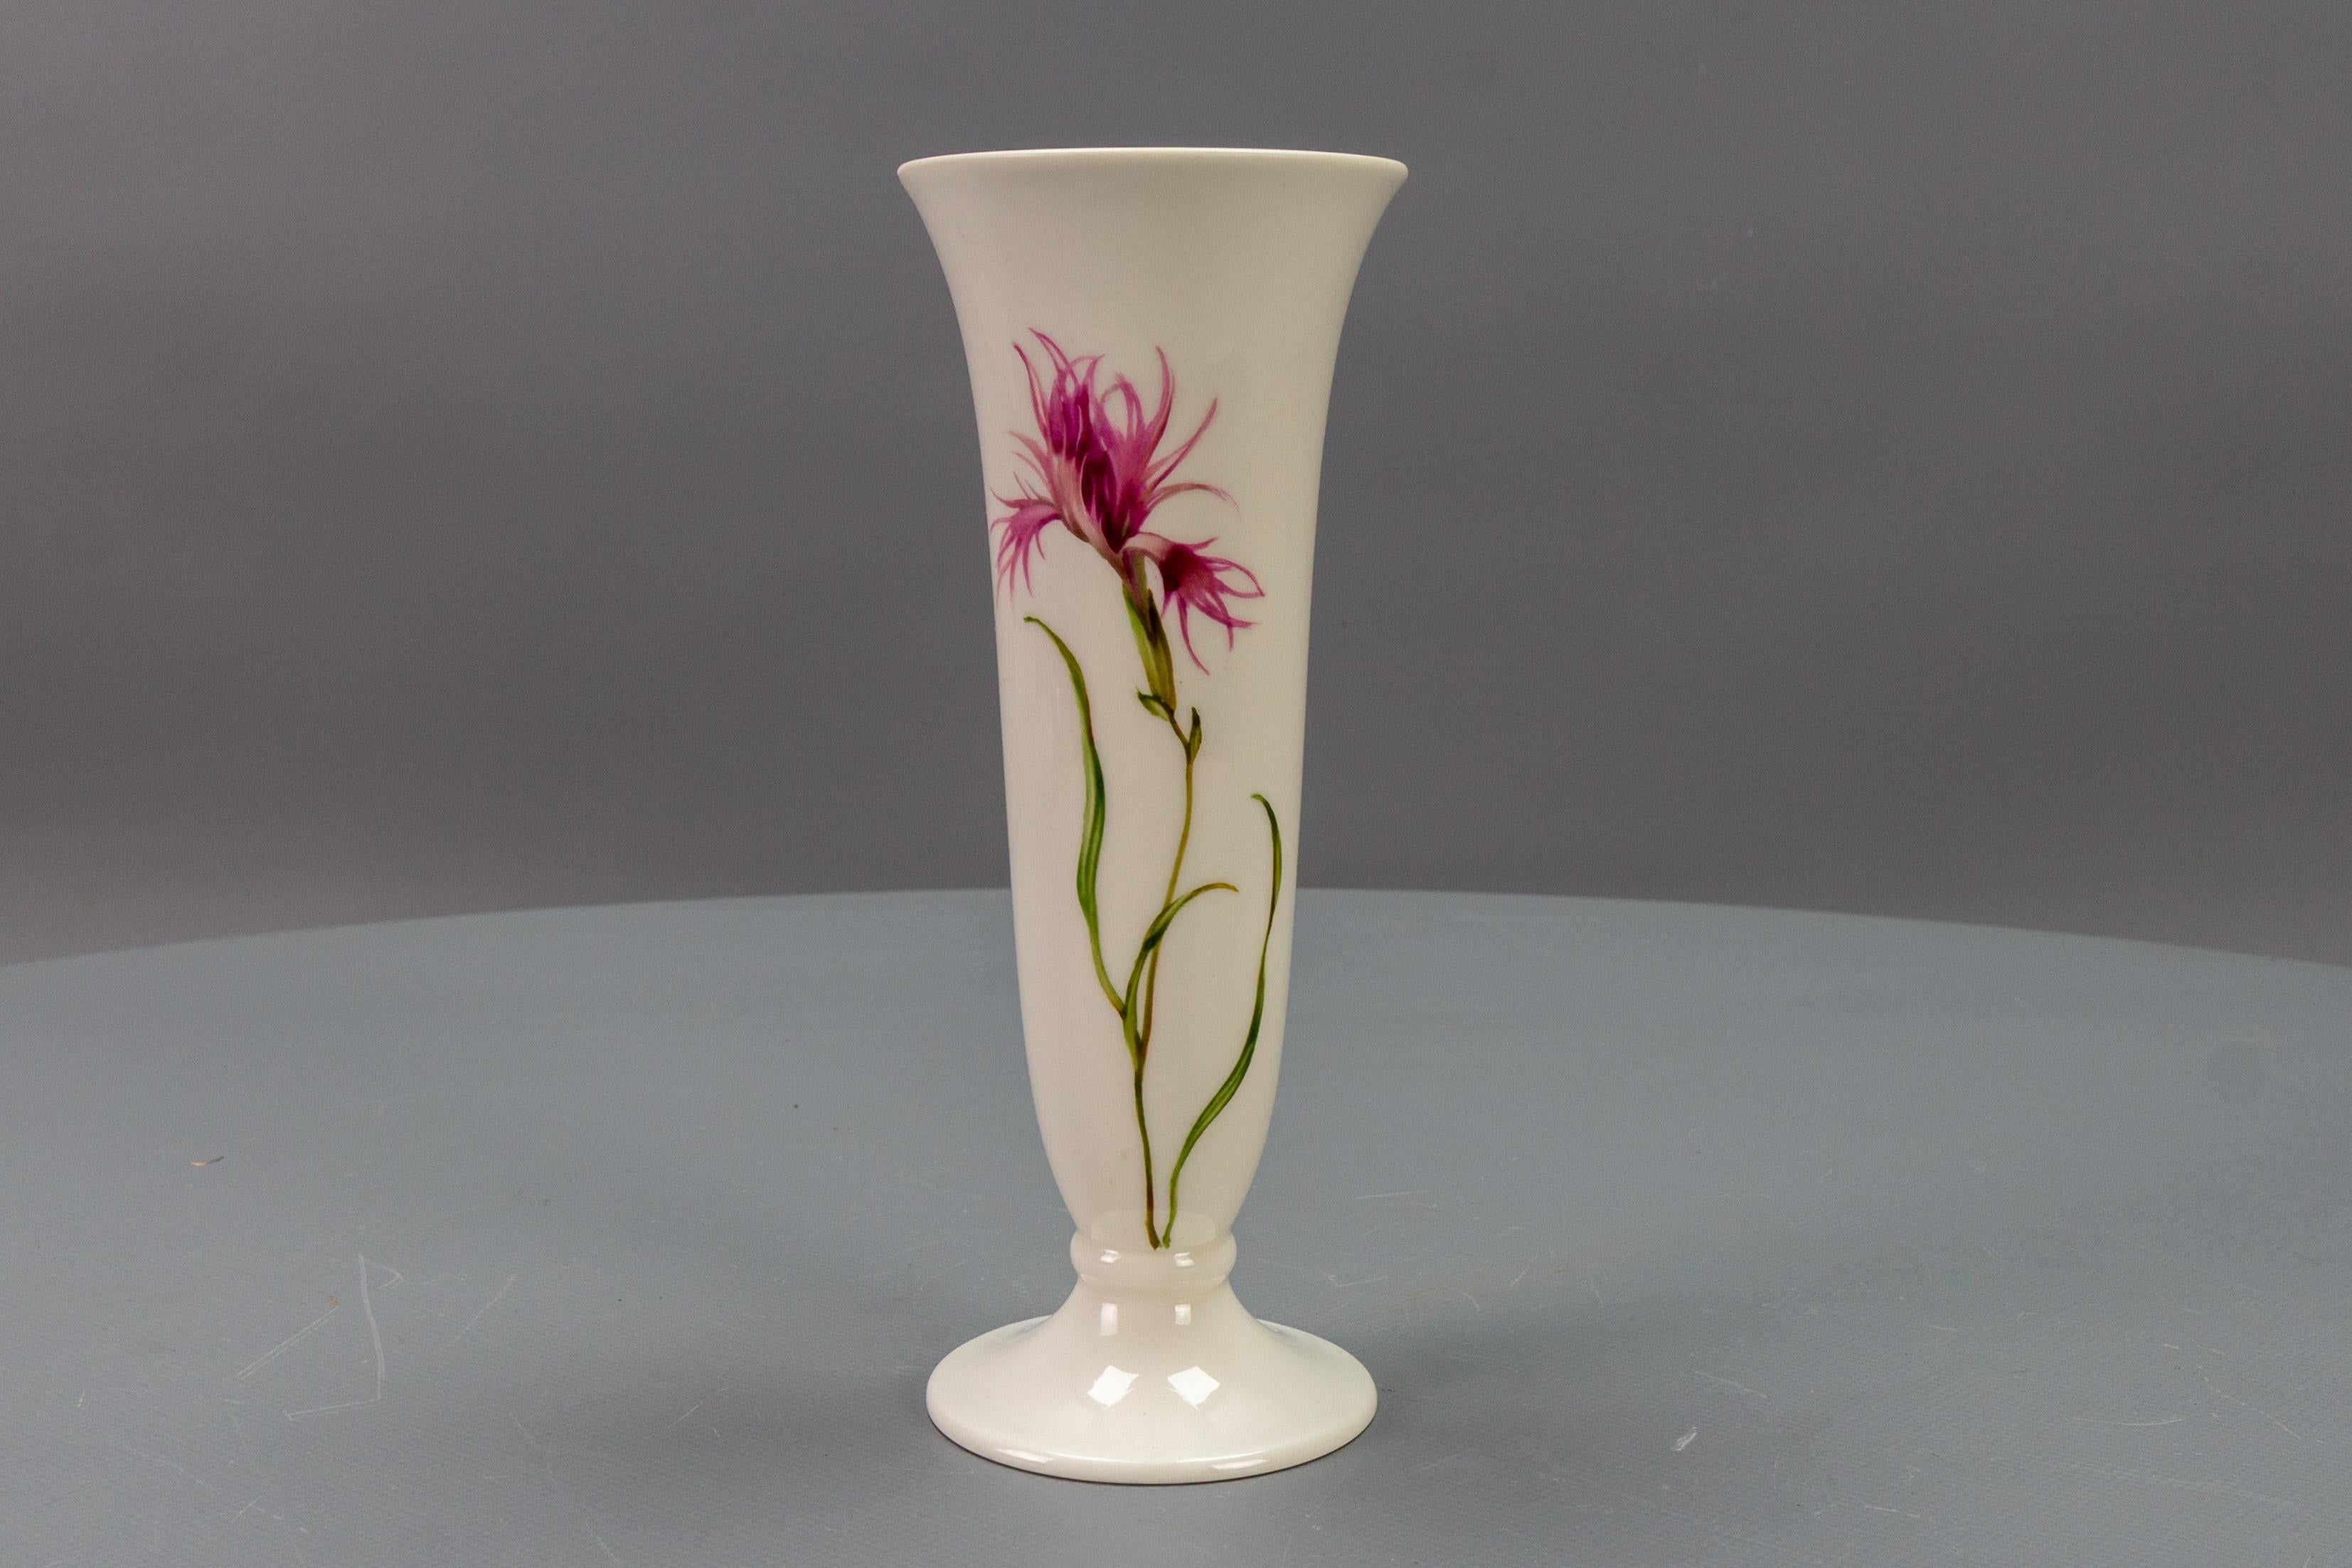 This adorable white or light ivory color porcelain vase by Hutschenreuther Selb (LHS) Kunstabteilung (Art Department), Adler Berchtesgaden, features hand-painted flowers - pink feather carnation on two sides - one in a large bud and the other with